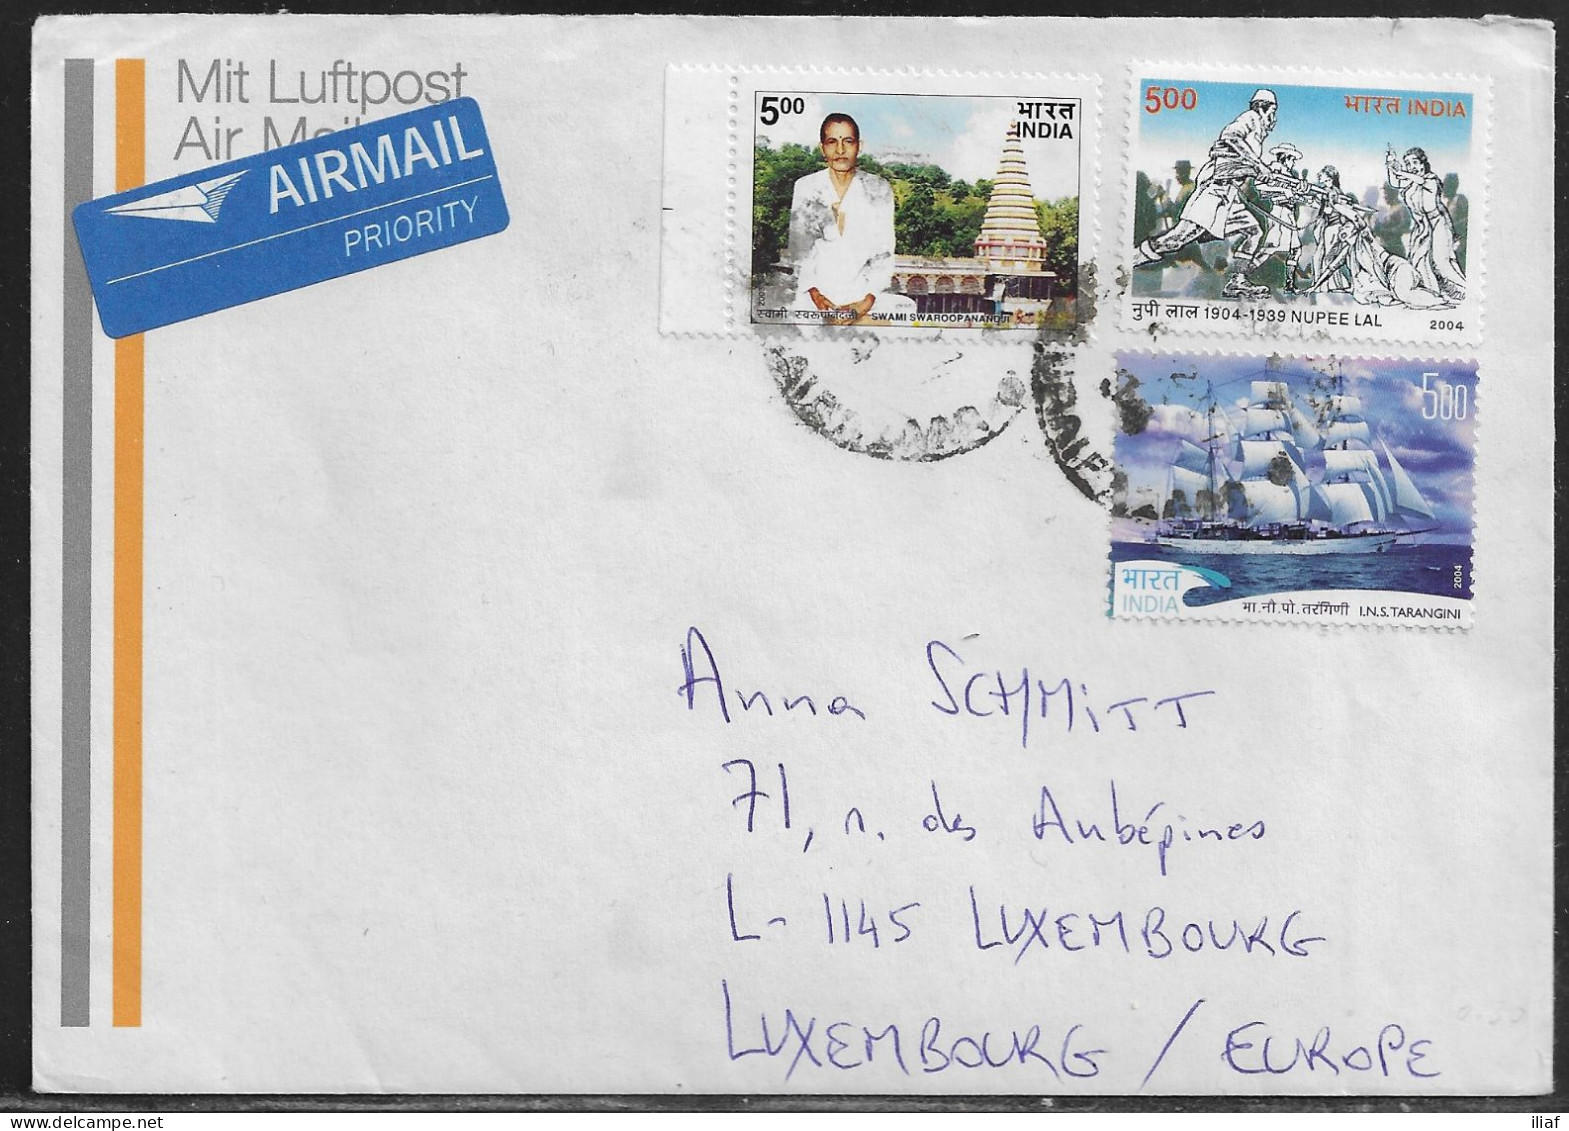 India. Stamps Sc. 2045, 2091, 2059 On Air Mail Letter, Sent To Luxembourg. - Brieven En Documenten